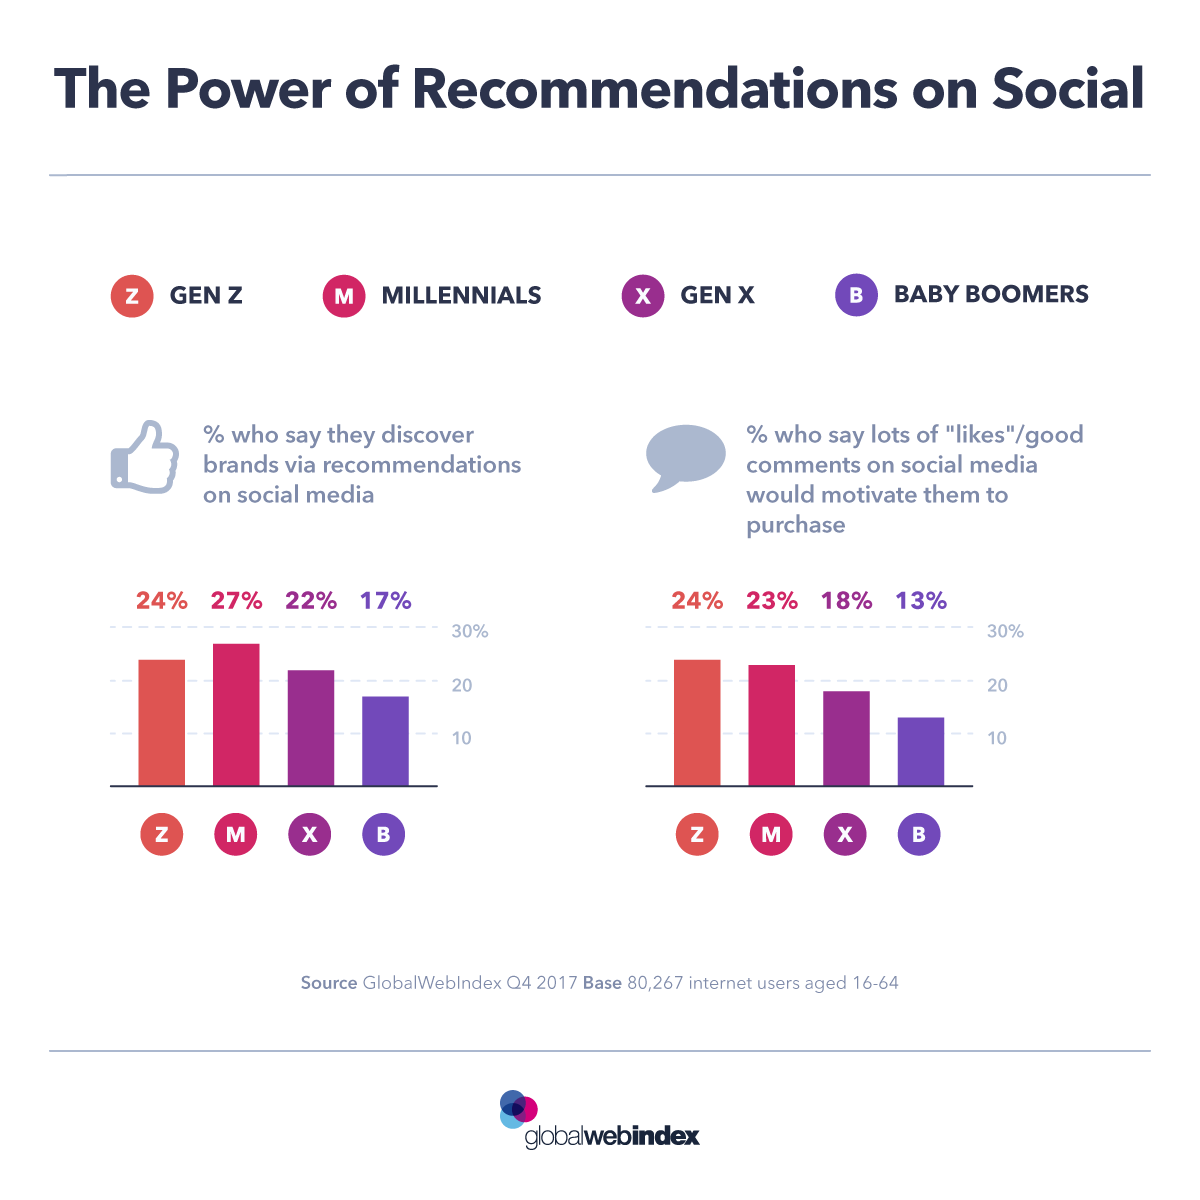 The Power of Recommendations on Social Media